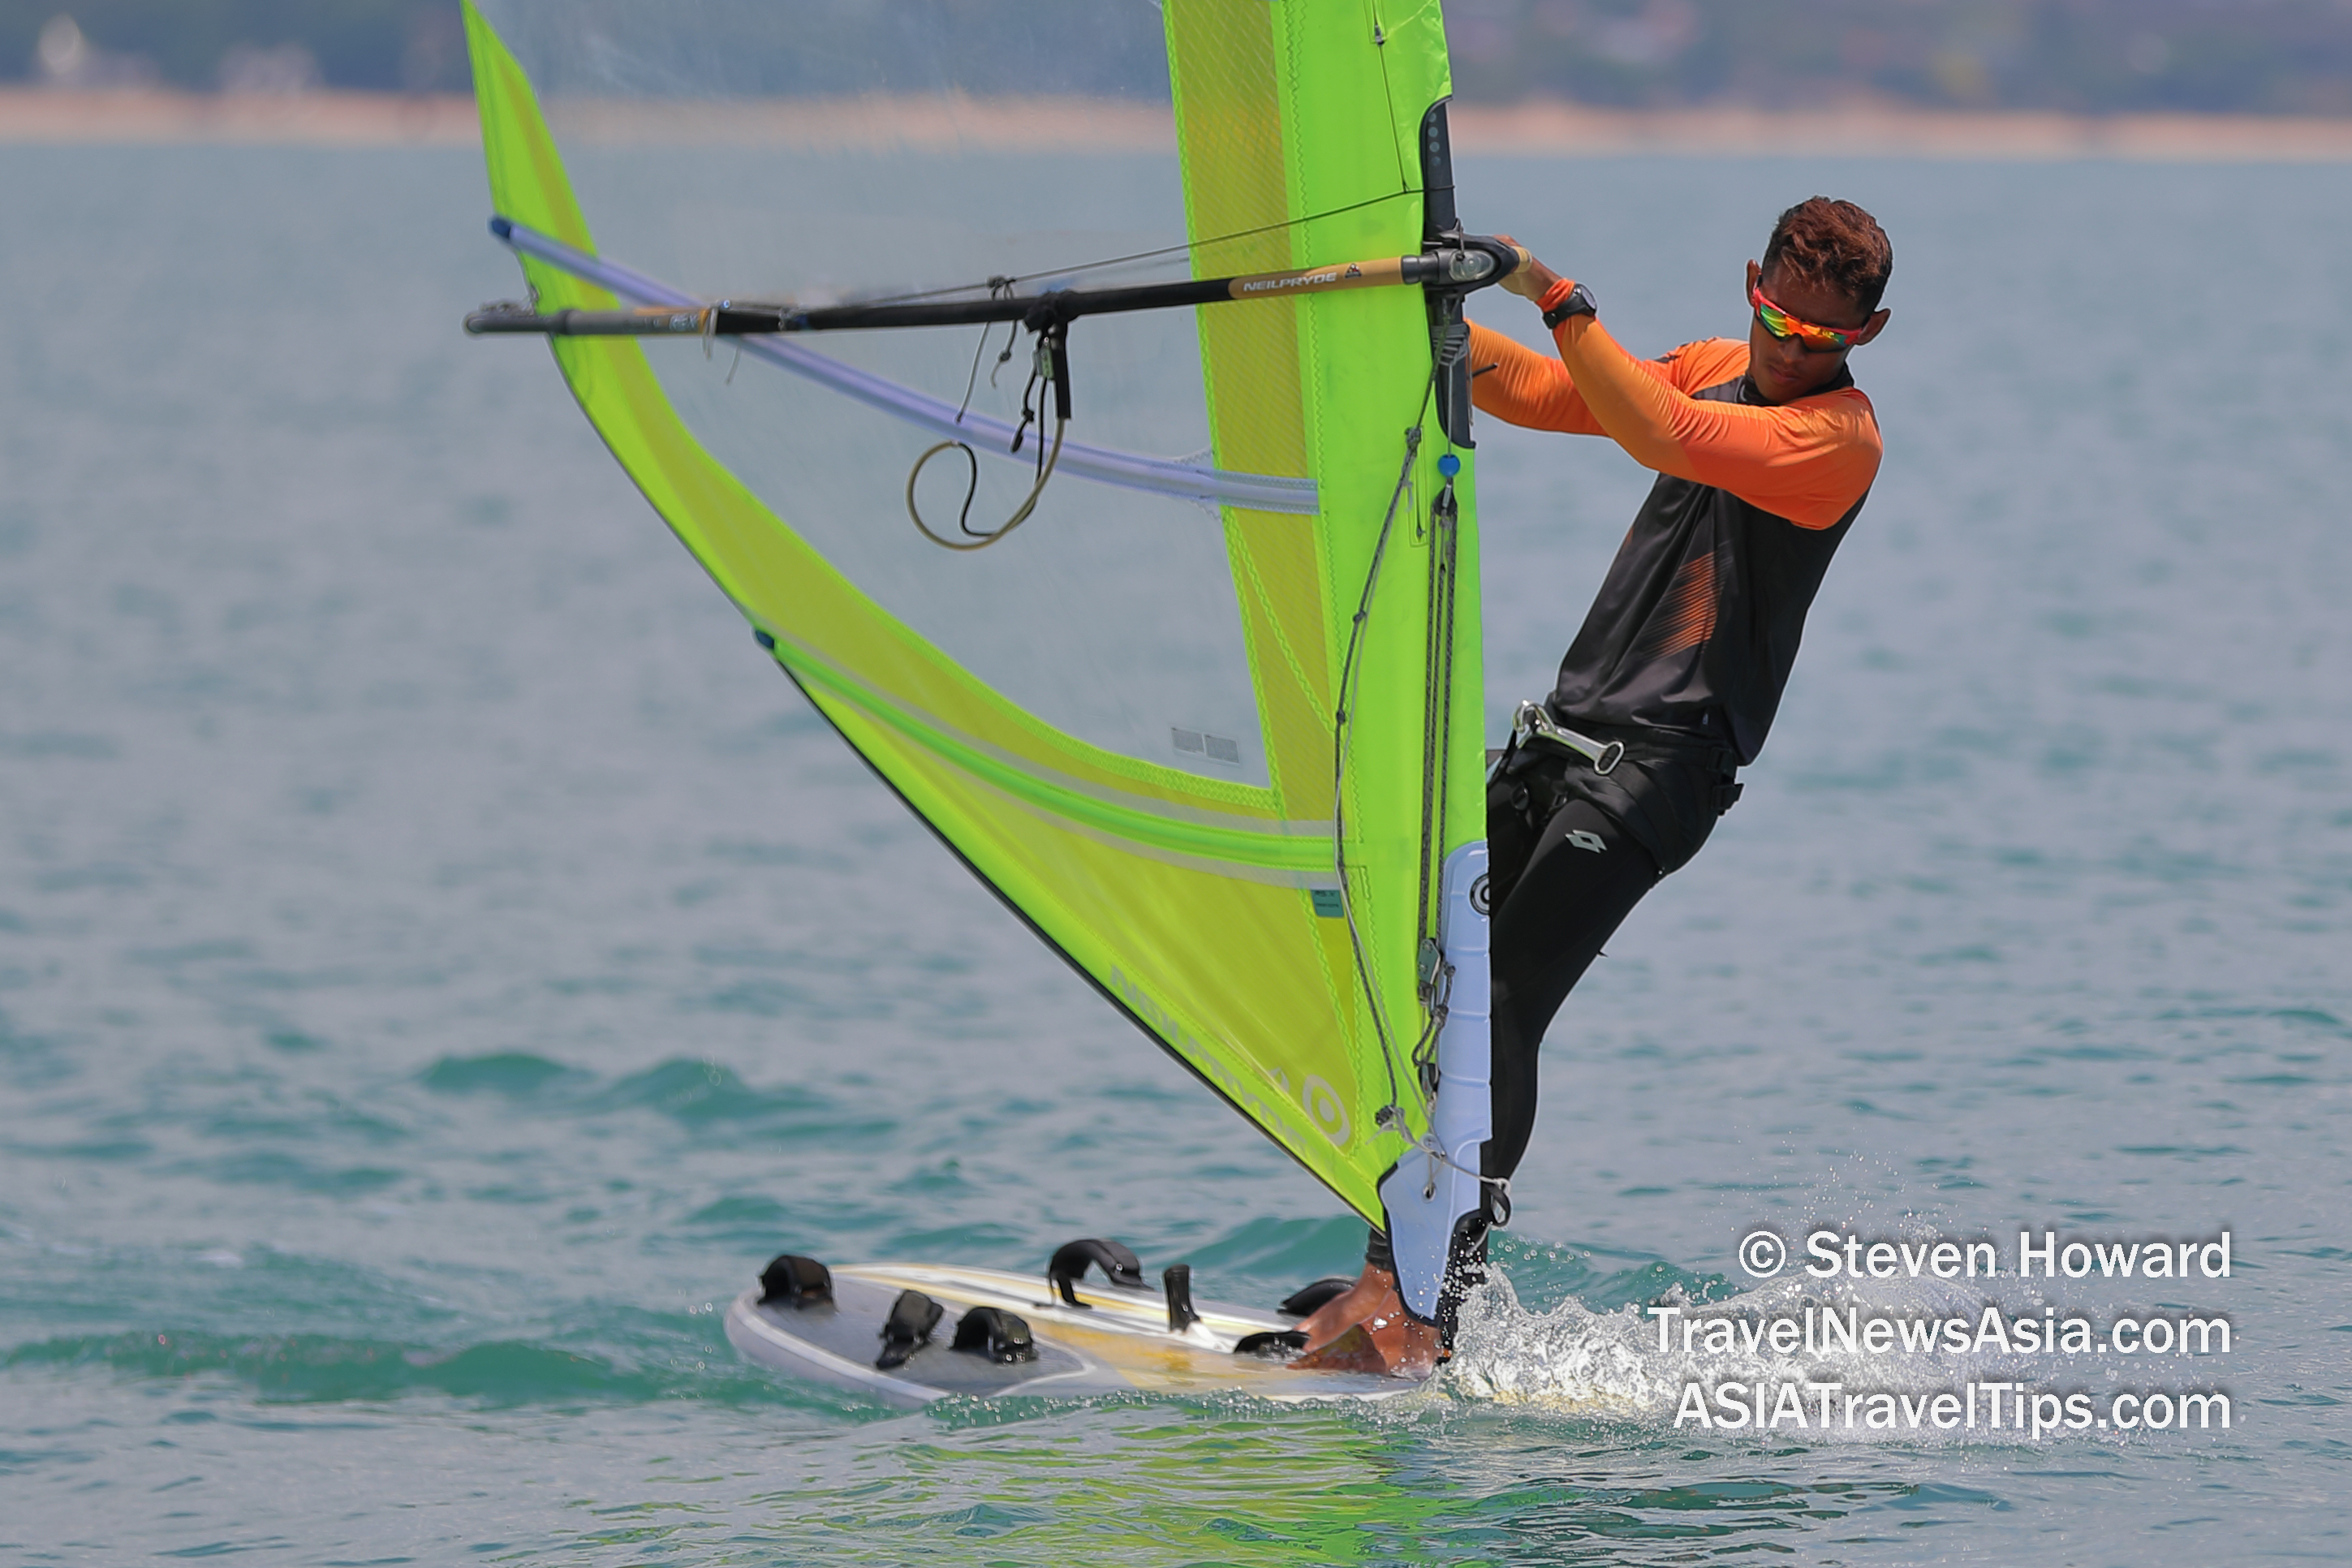 Windsurf action from Top of the Gulf Regatta 2019 in Pattaya, Thailand on Saturday. Picture by Steven Howard of TravelNewsAsia.com. Click to enlarge.